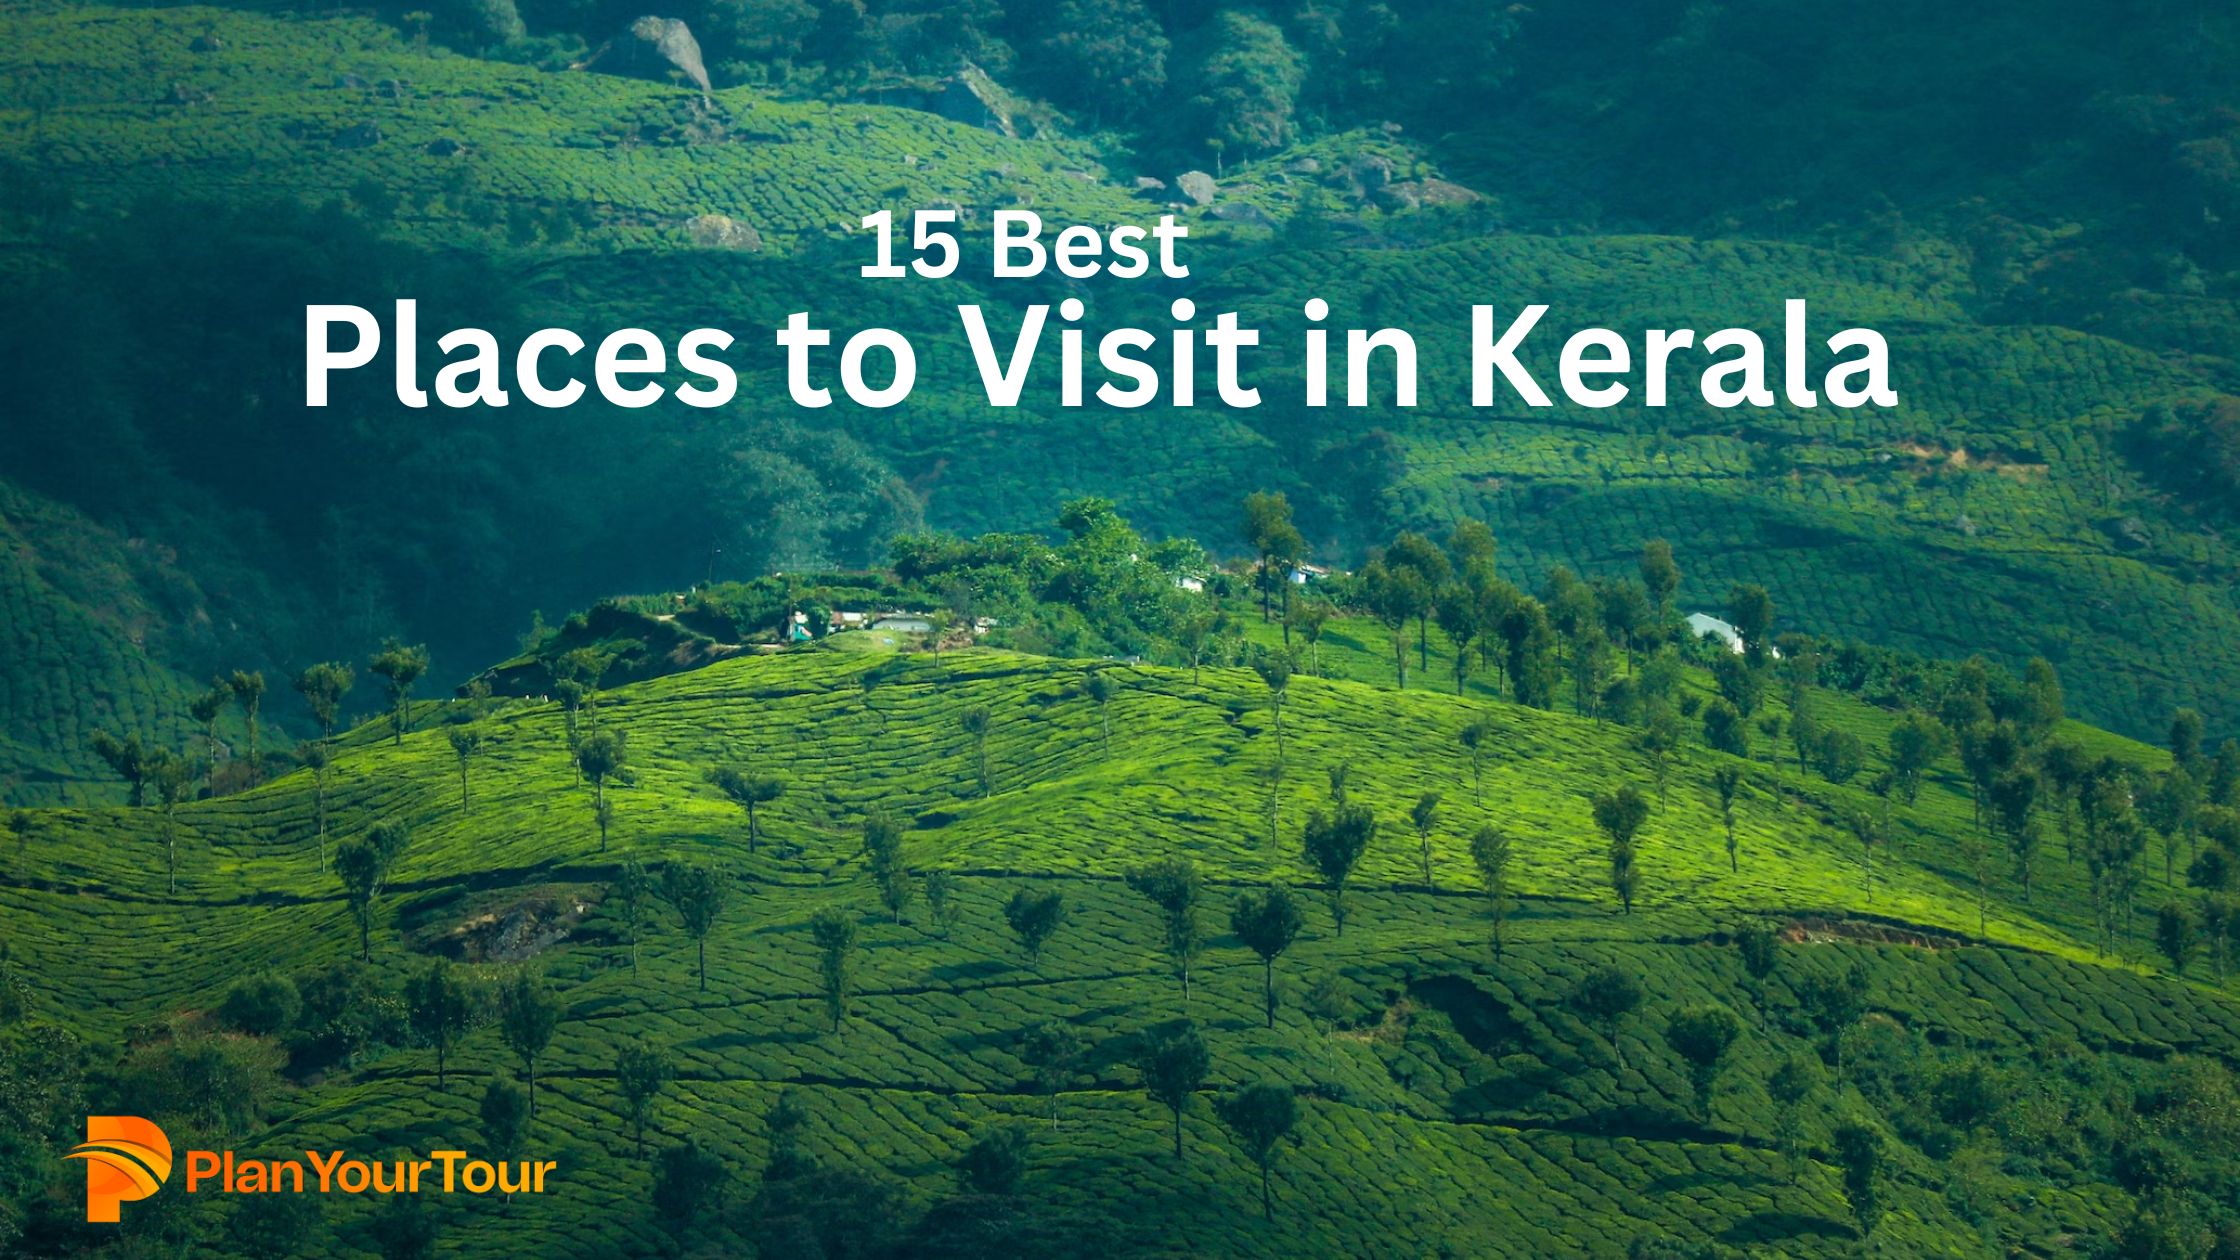 a green hills with trees : 15 Best Places to Visit in Kerala